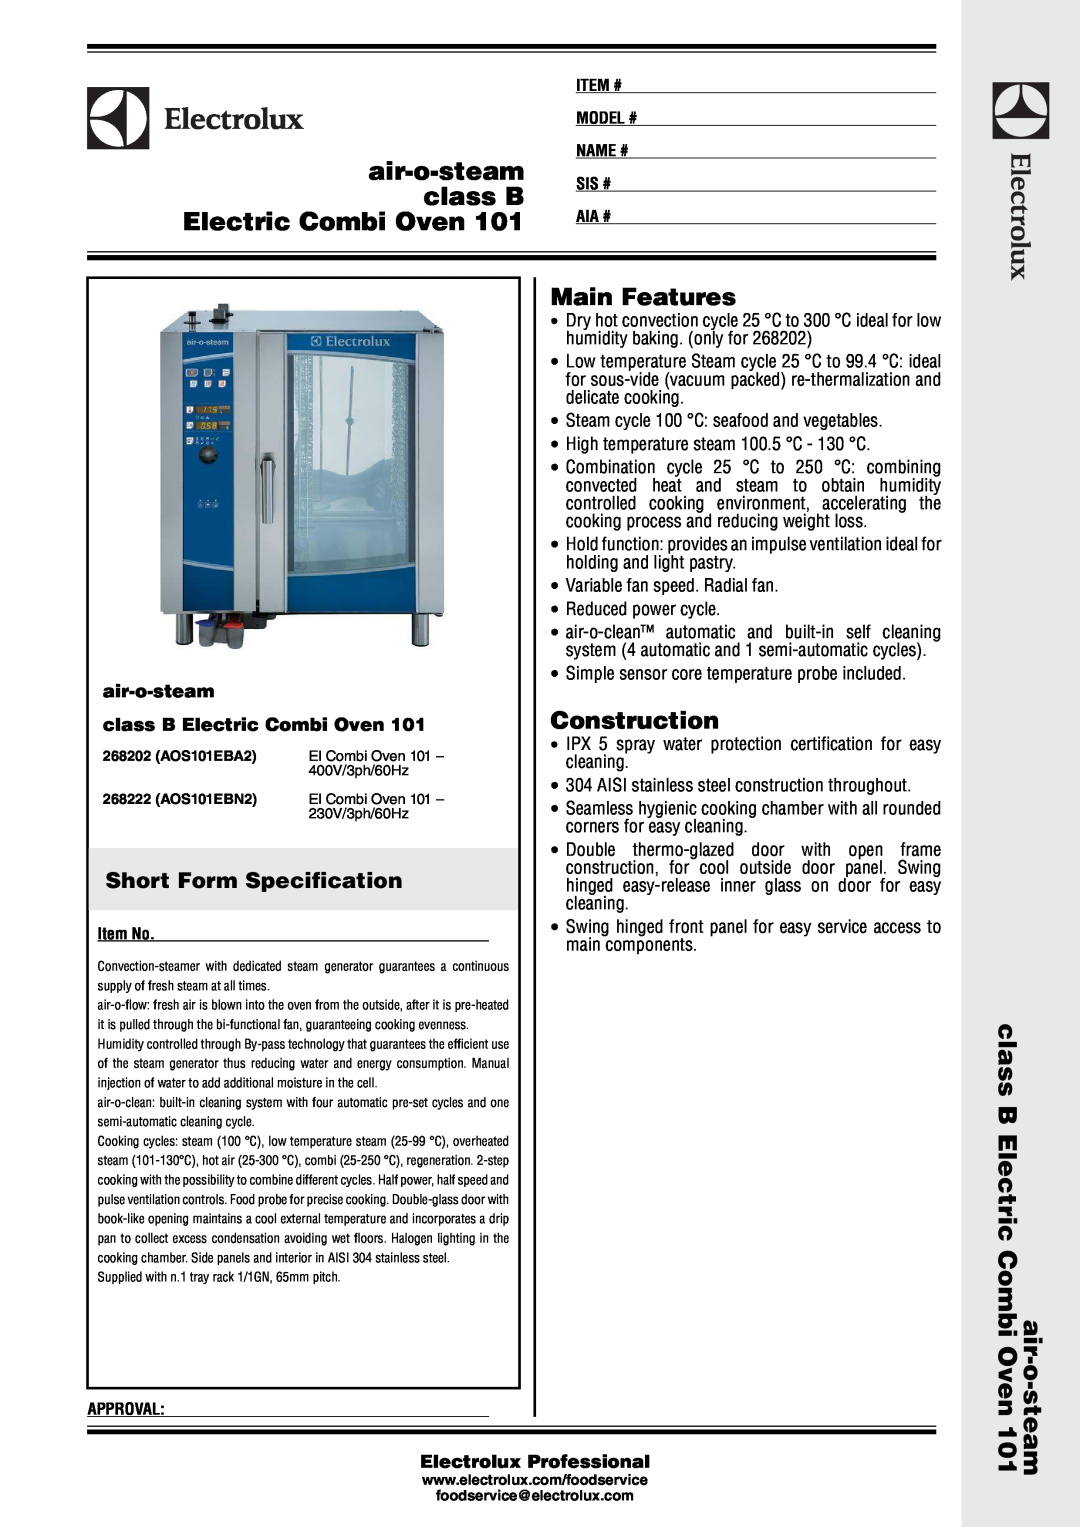 Electrolux 268202 manual air-o-steam class B Electric Combi Oven, Short Form Specification, Main Features 